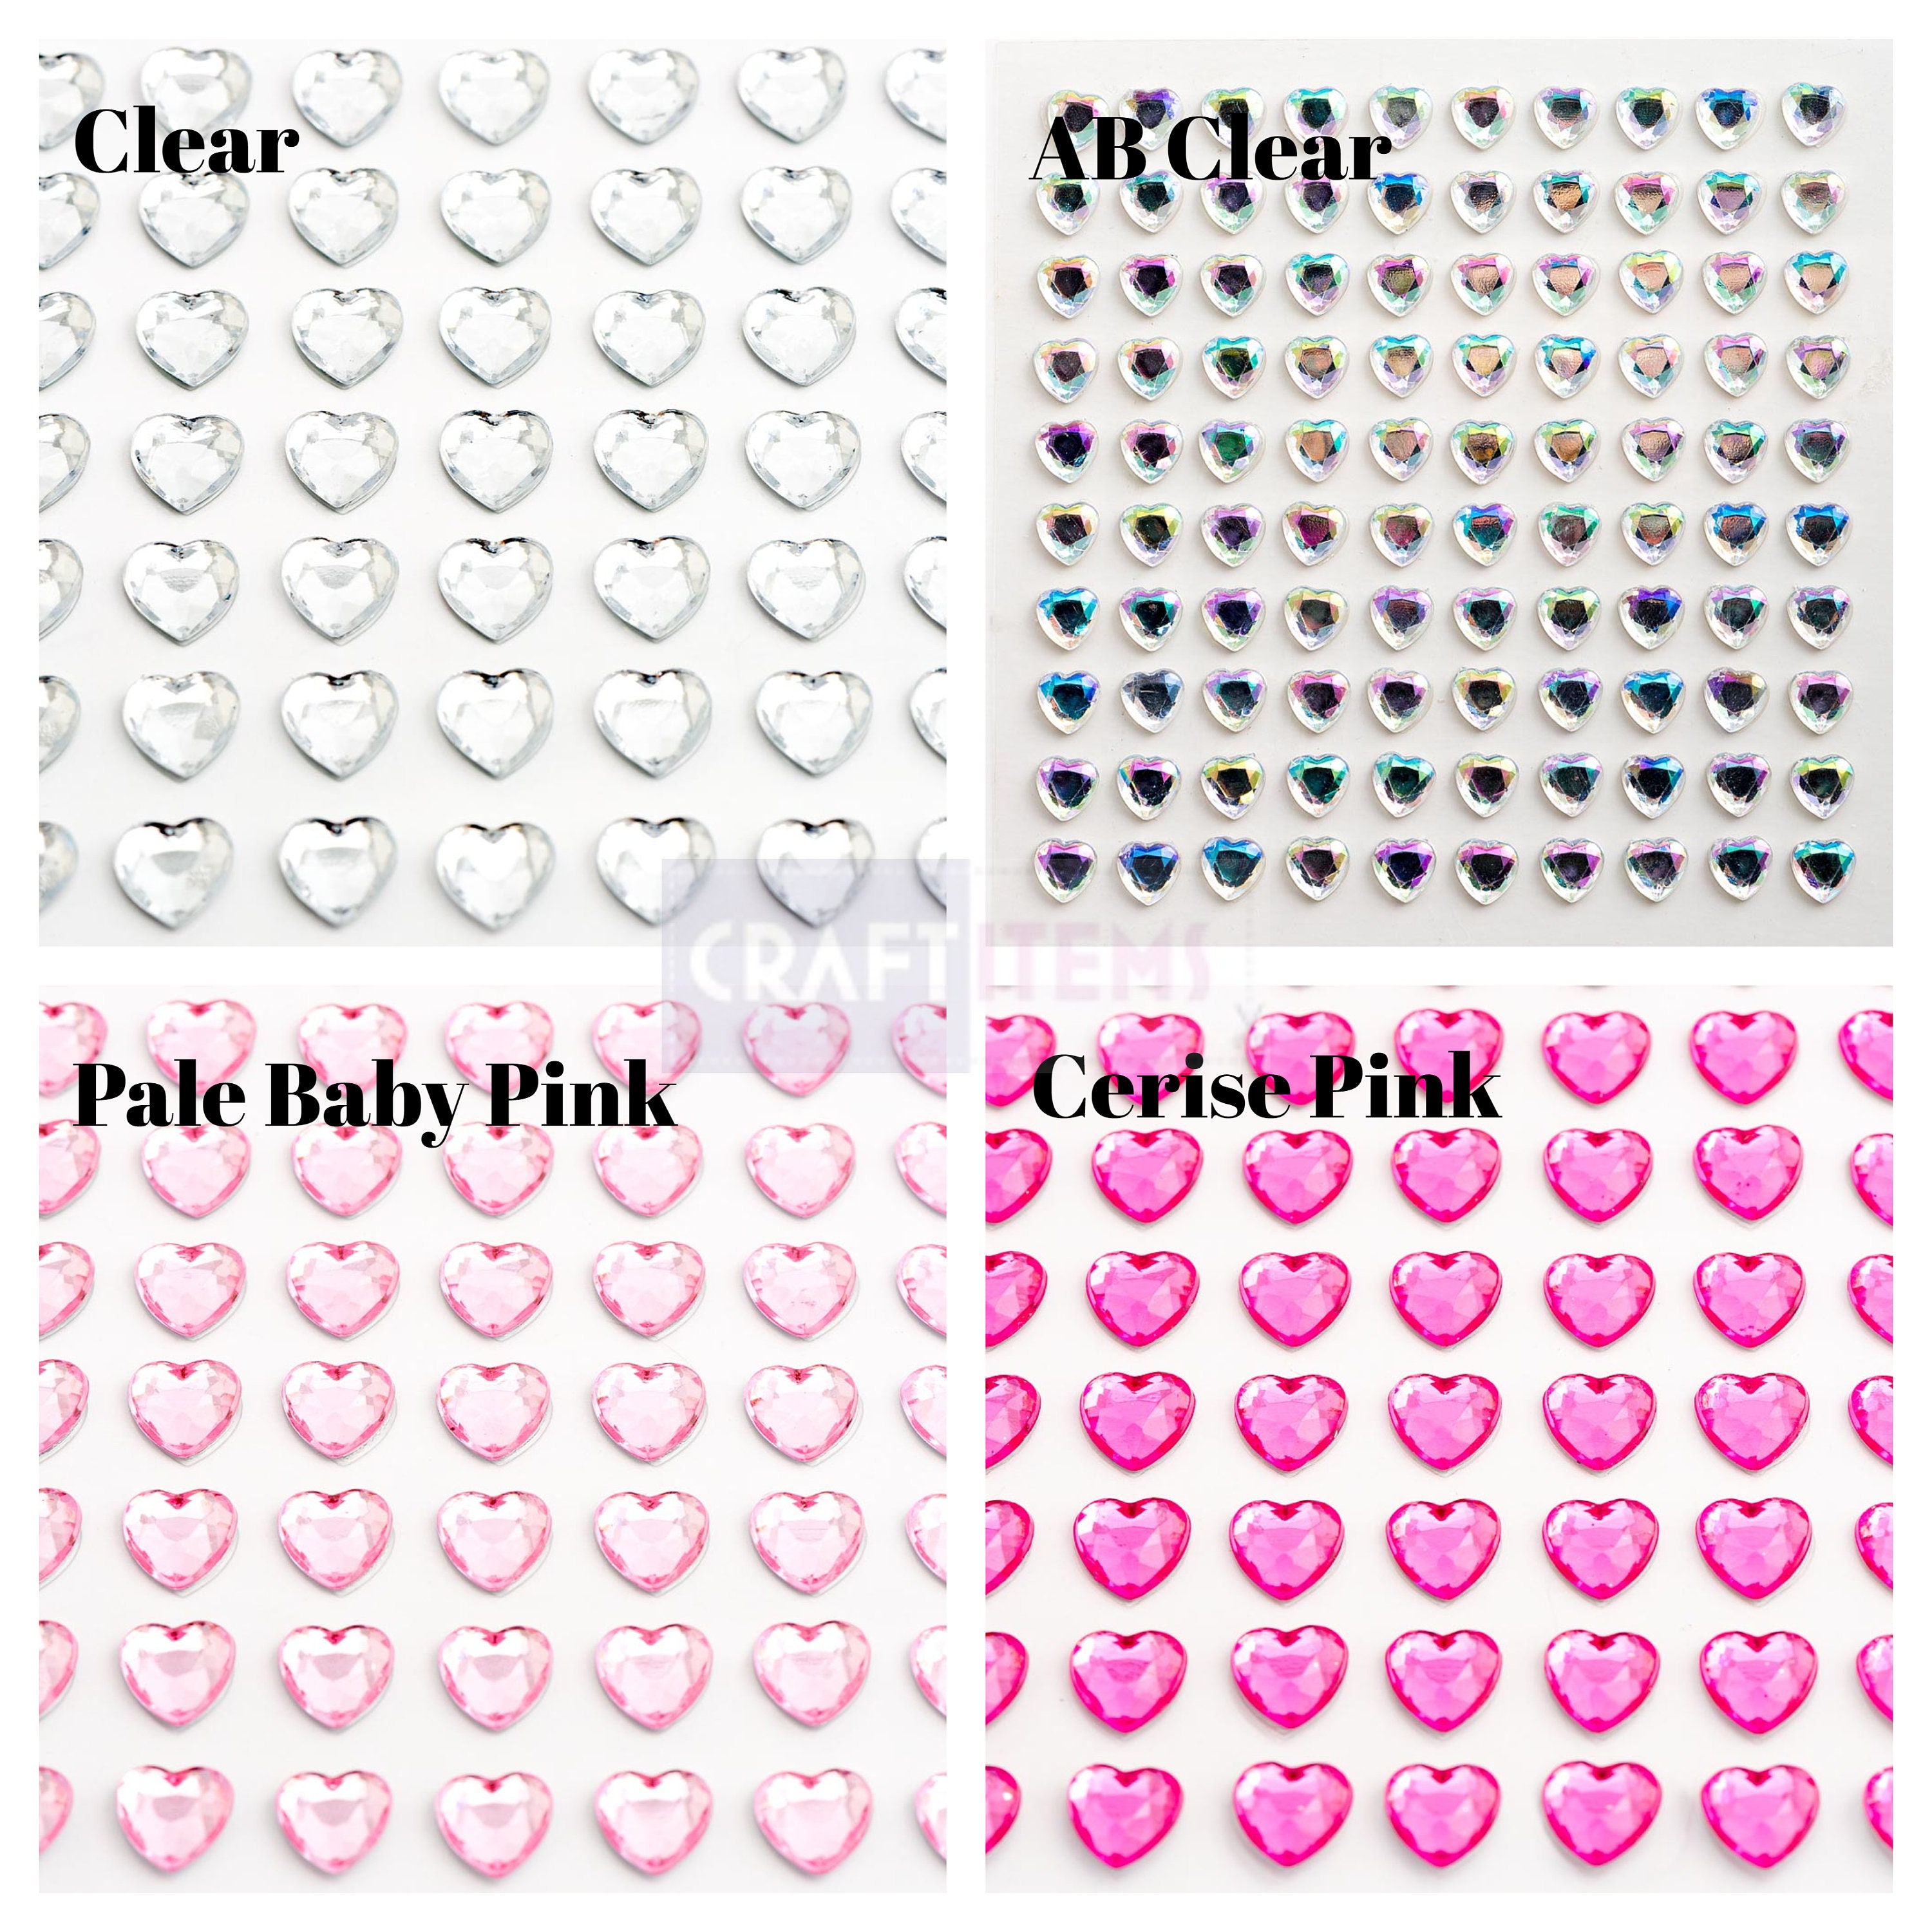 Self Adhesive Crystal Hearts Sheet of 24 Small Crystal Heart Stickers Stick  on Crystal Hearts Rhinestone Heart Stickers 